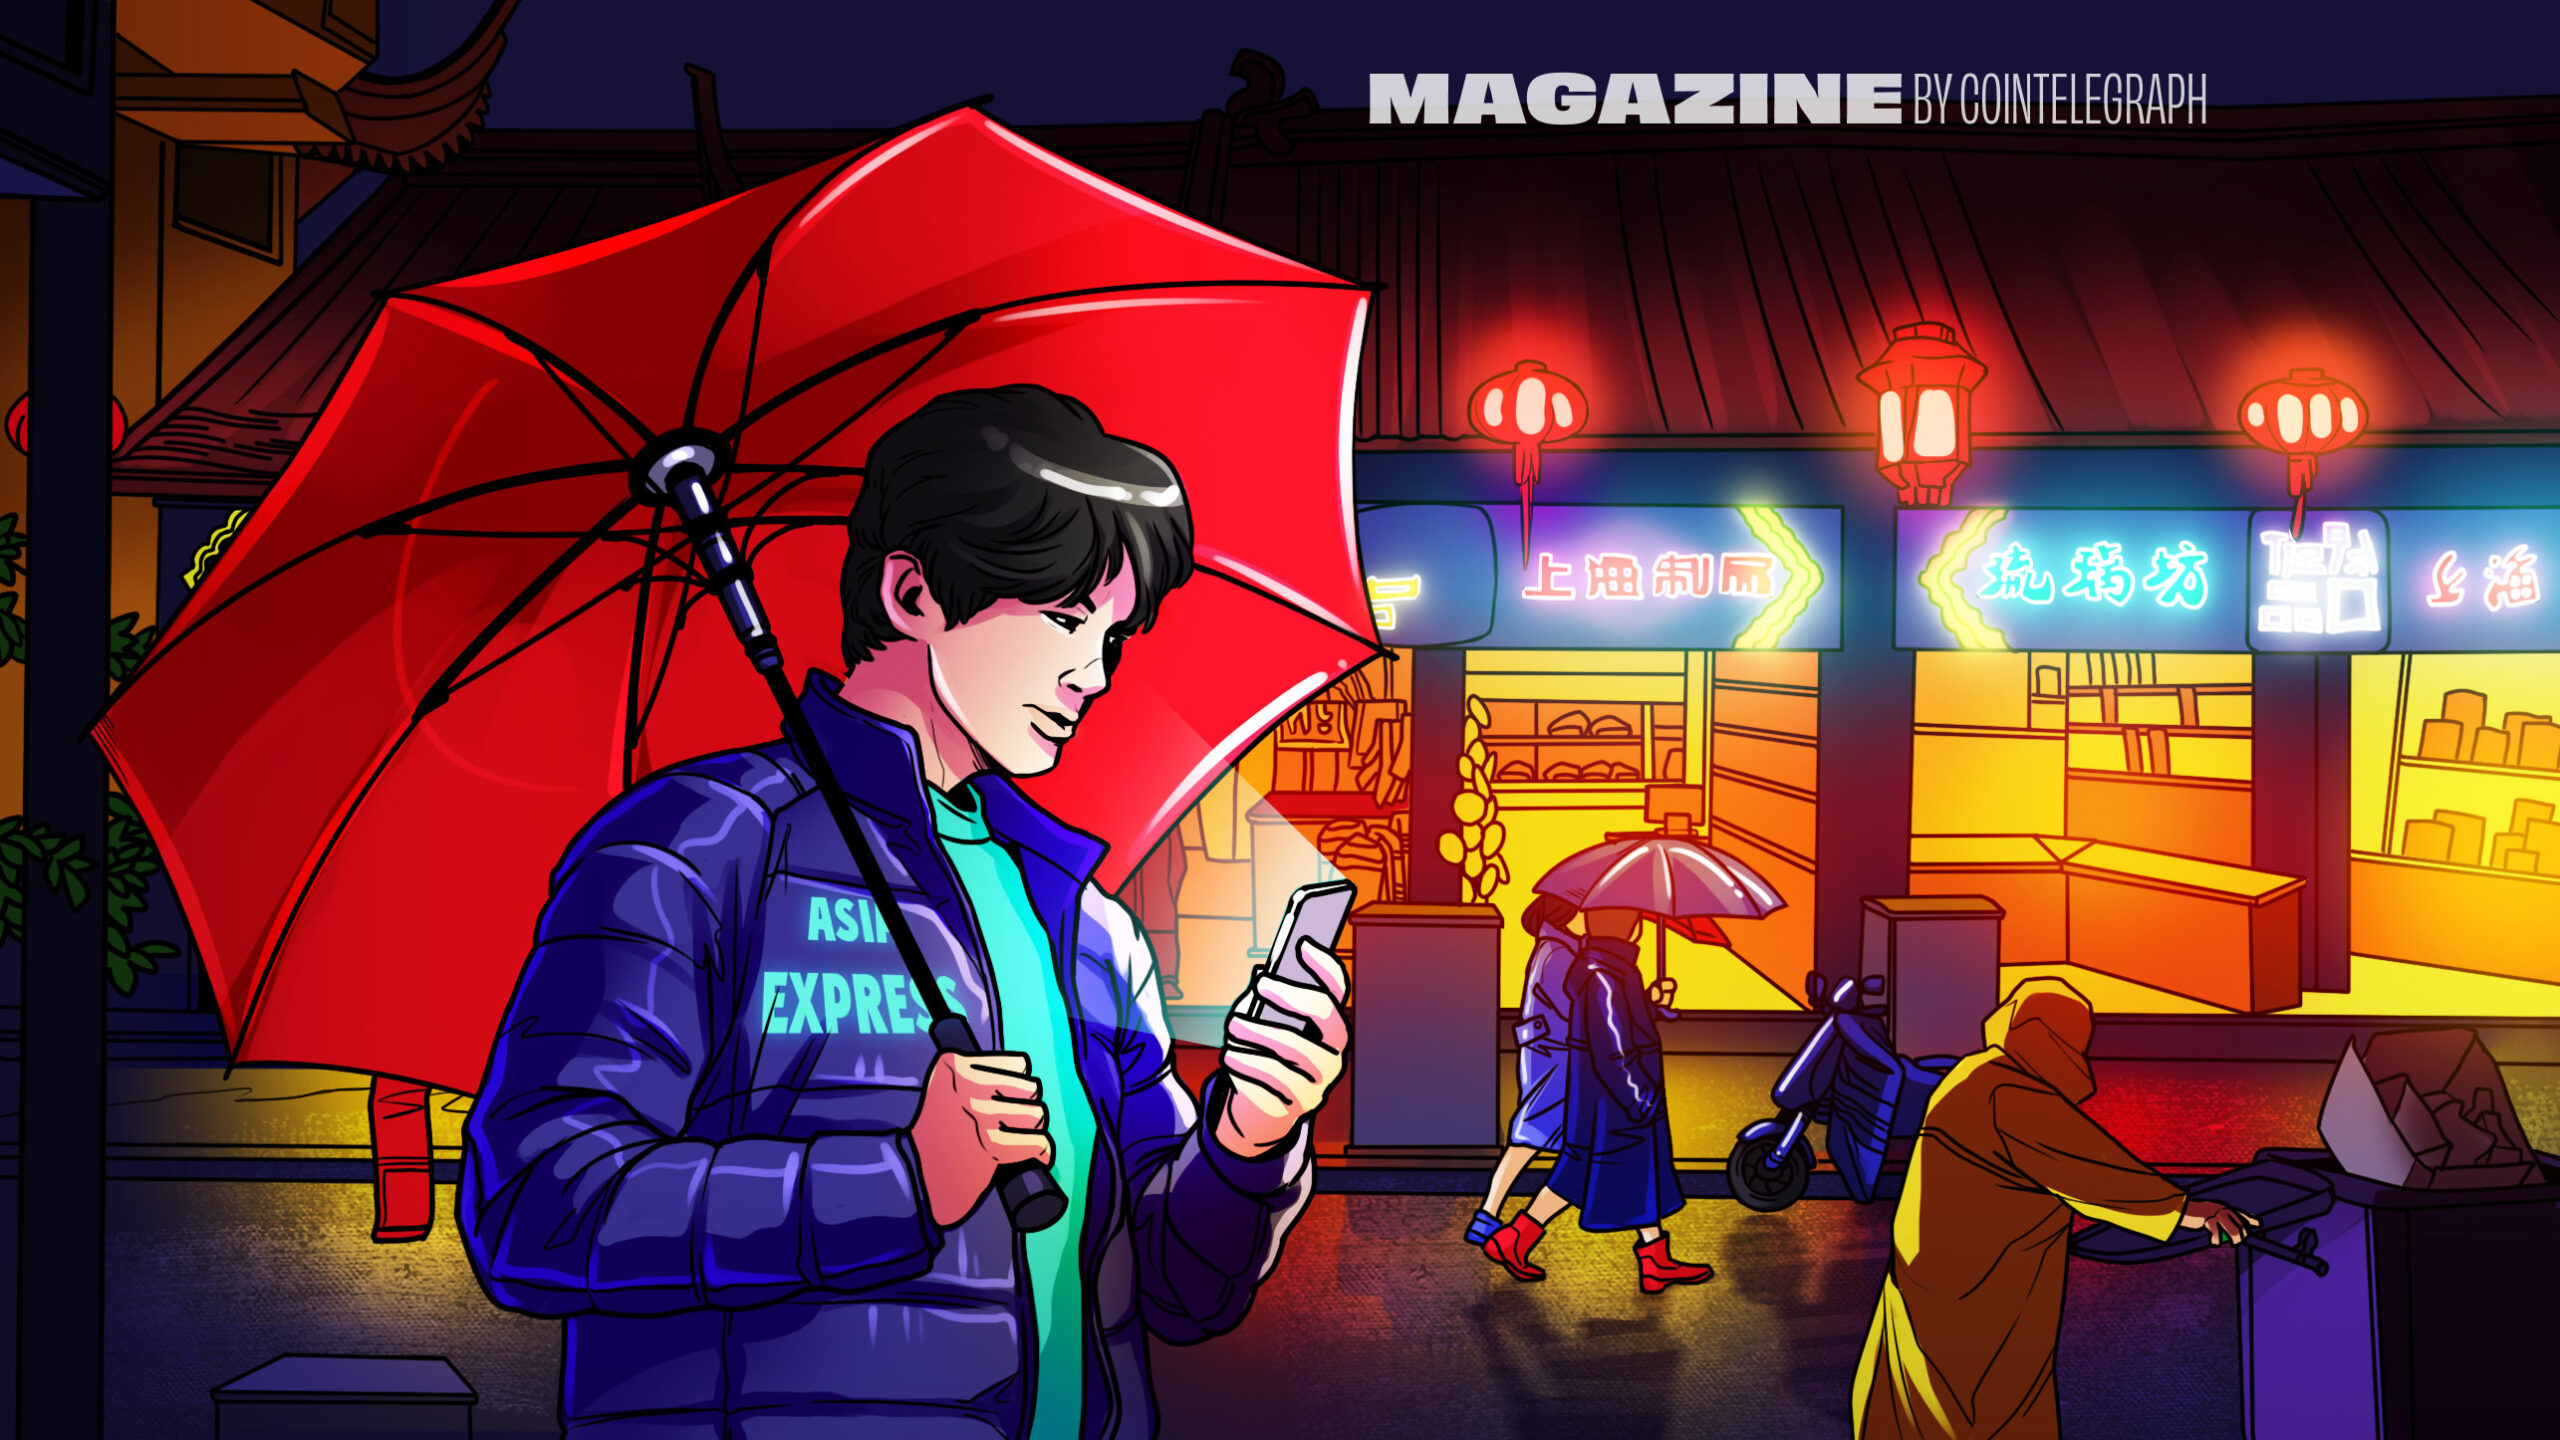 No civil protection for crypto in China, $300K to list coins in Hong Kong? Asia Express – Cointelegraph Magazine